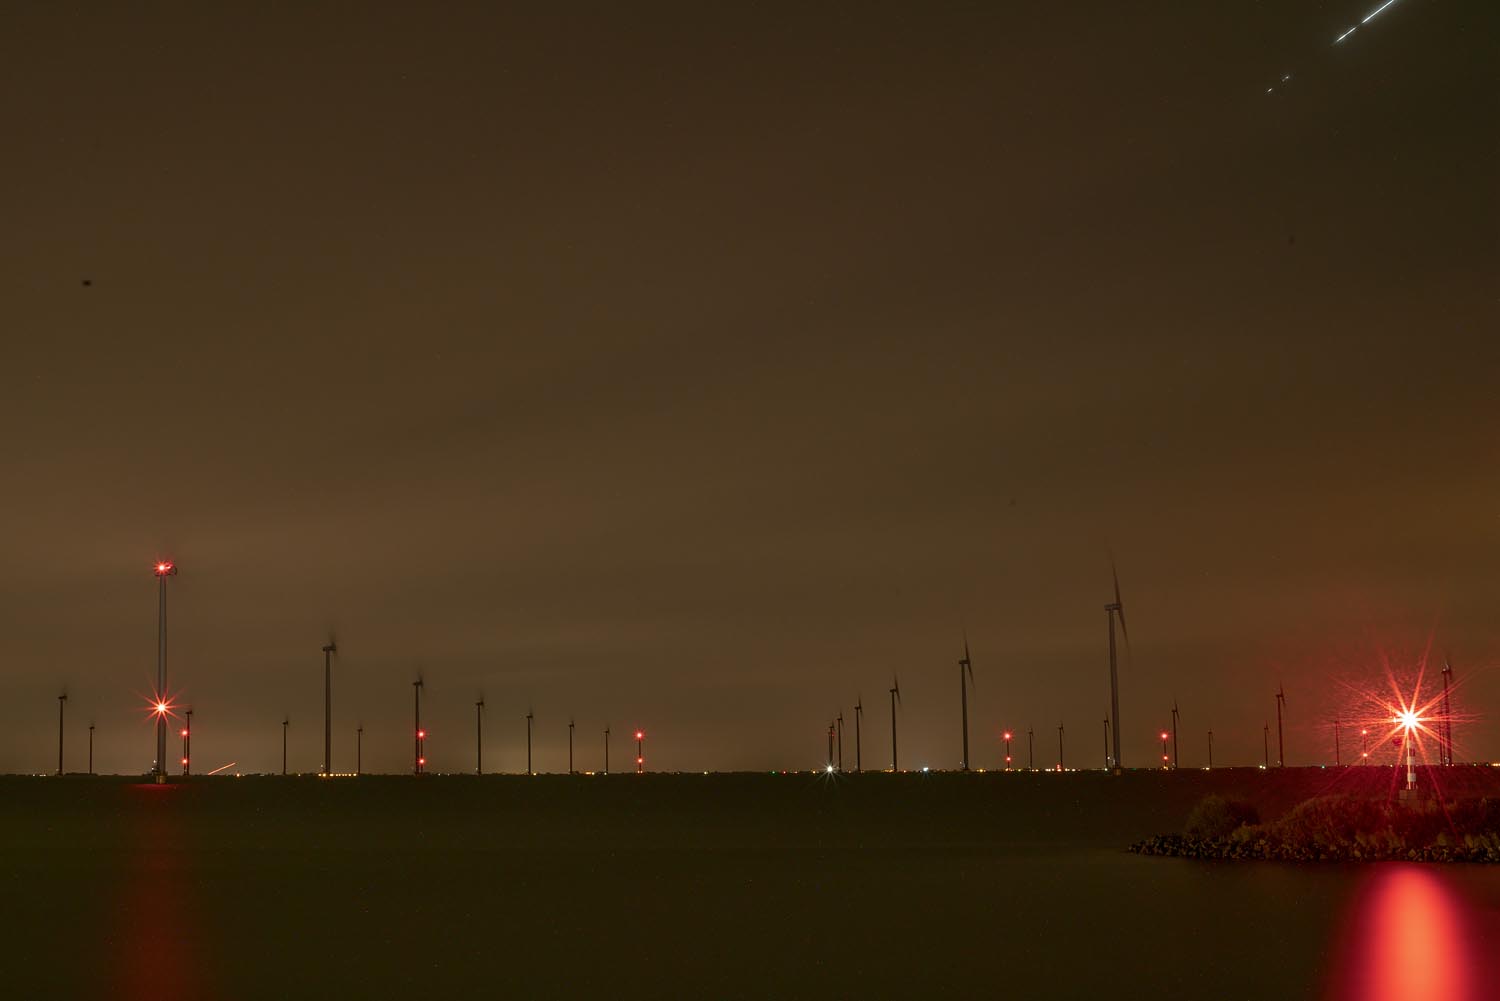 Sites at Risk of Climate Change: Night Landscape Photographs in The Netherlands, Steve Giovinco, Sustainable Energy, with Strange with Red Light and Line in Sky, Fryslan, Flevoland